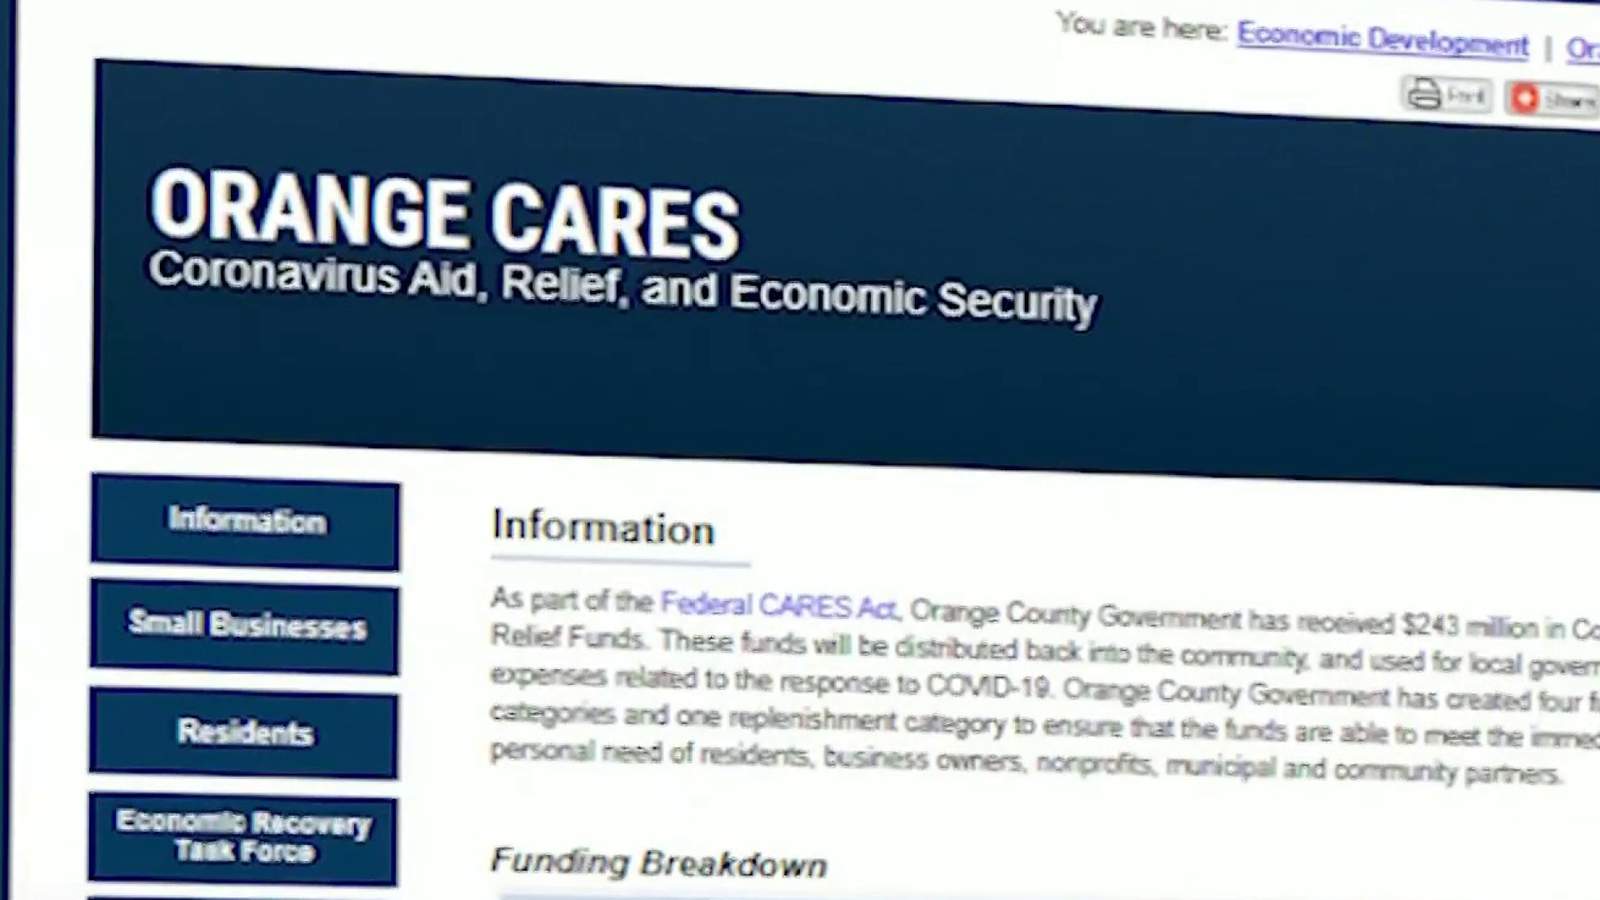 Due to high demand, Orange County closing micro-grant applications